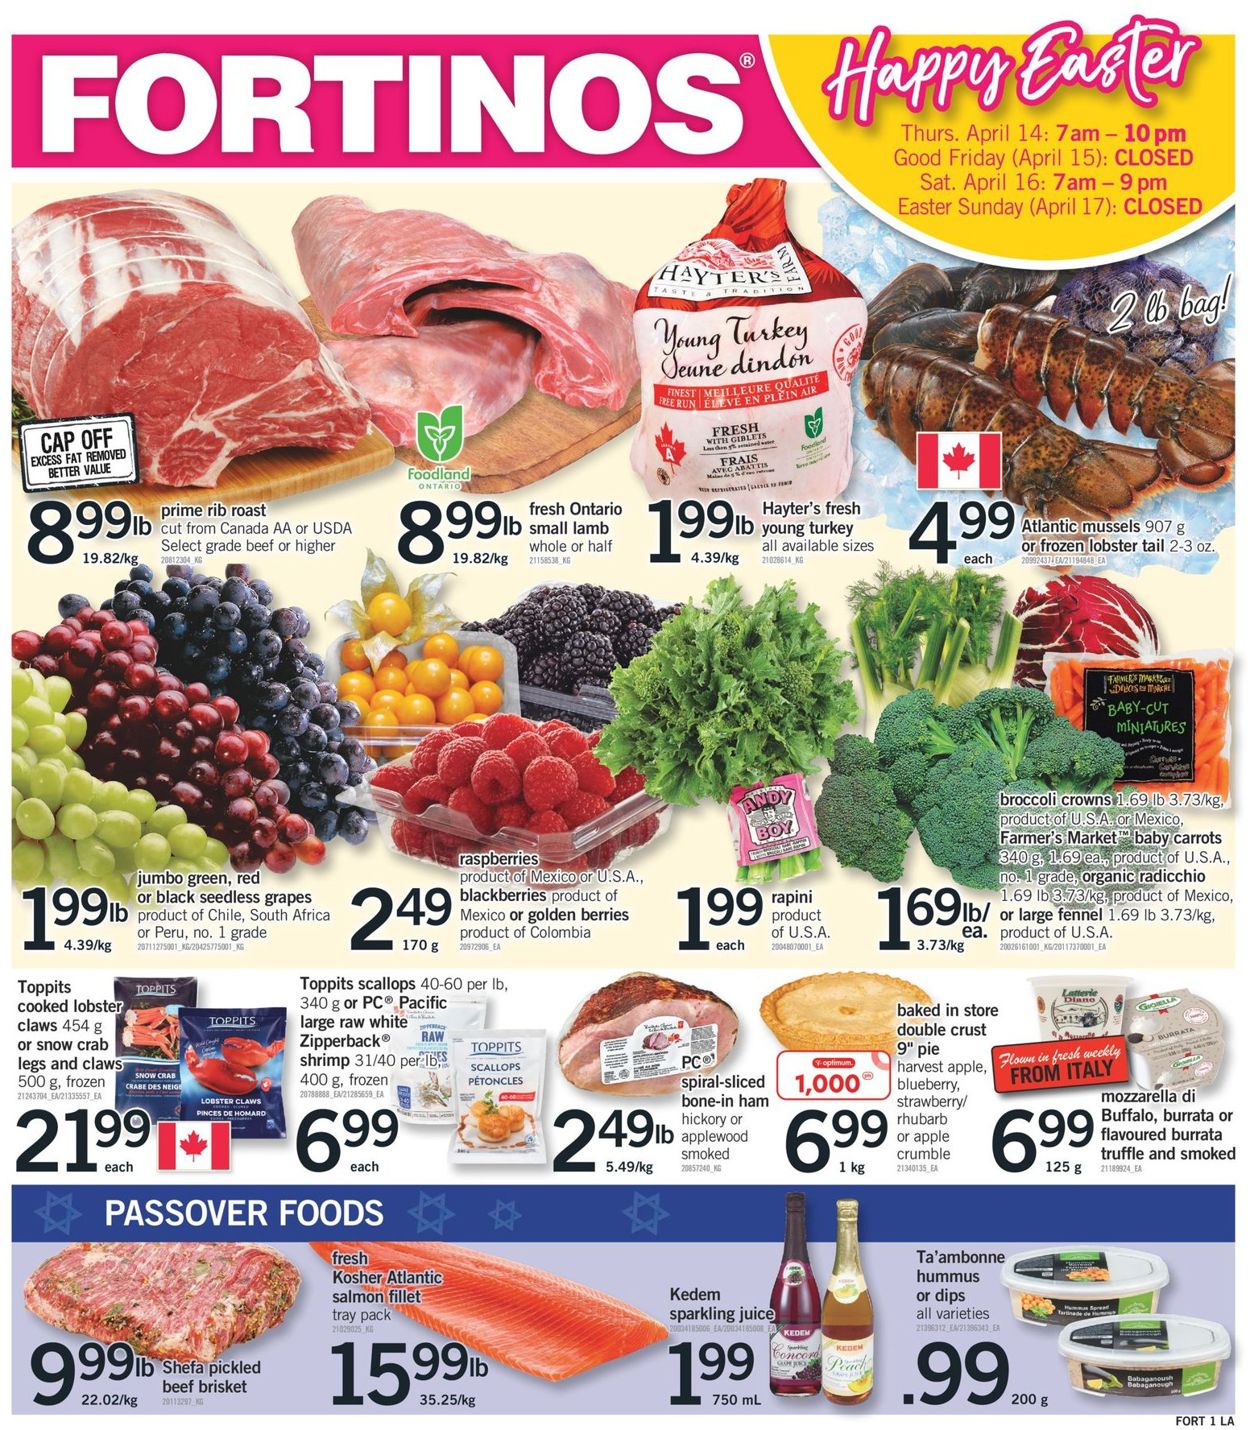 Fortinos EASTER 2022 Flyer - 04/14-04/16/2022